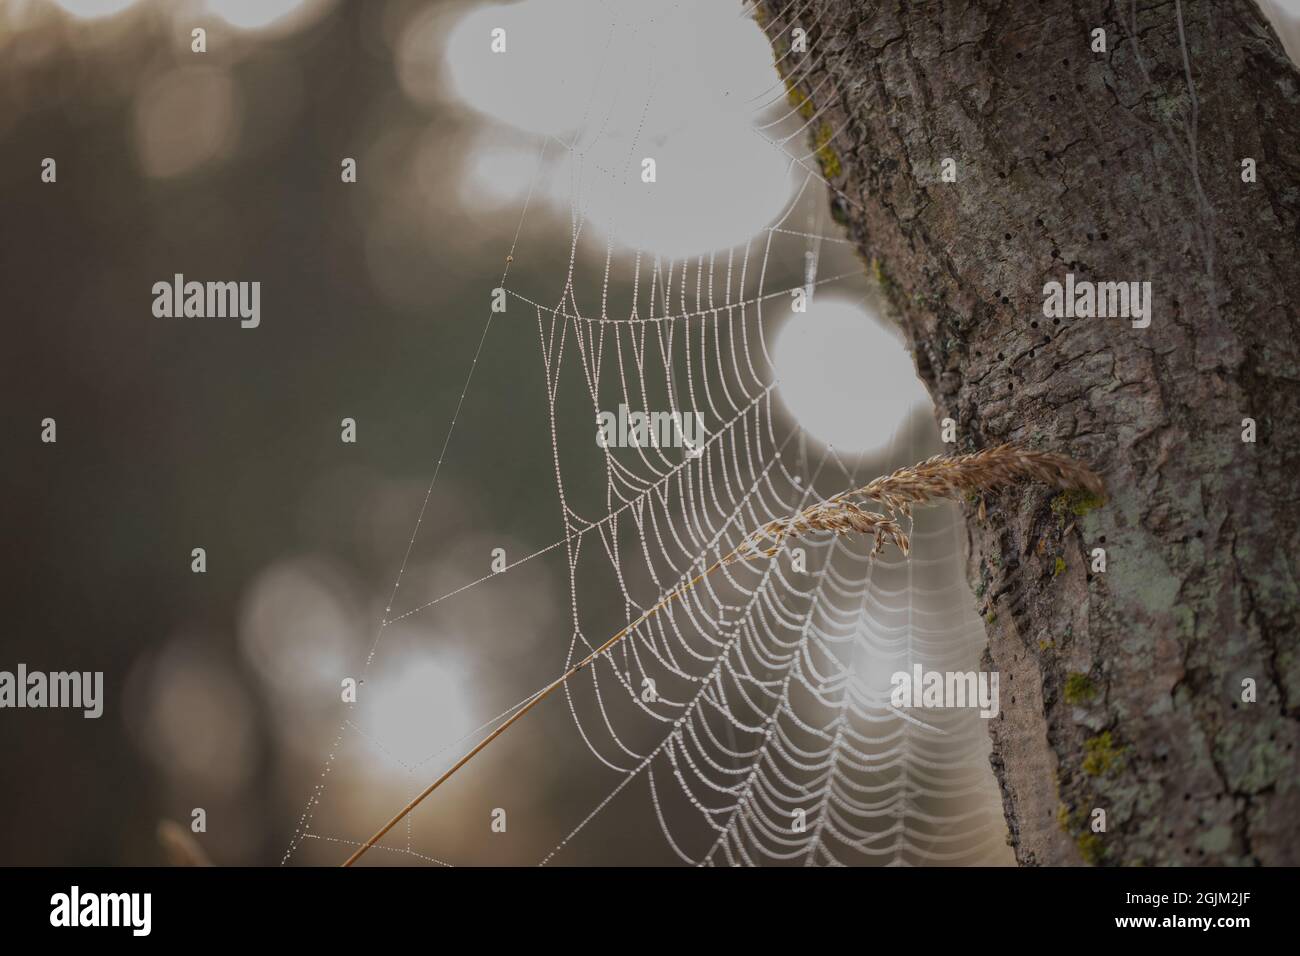 Overnight spun spider’s web, covered in morning dew. Web, dew laden, just backlit by early morning, dawn, sun suddenly appearing from over the horizon. Stock Photo